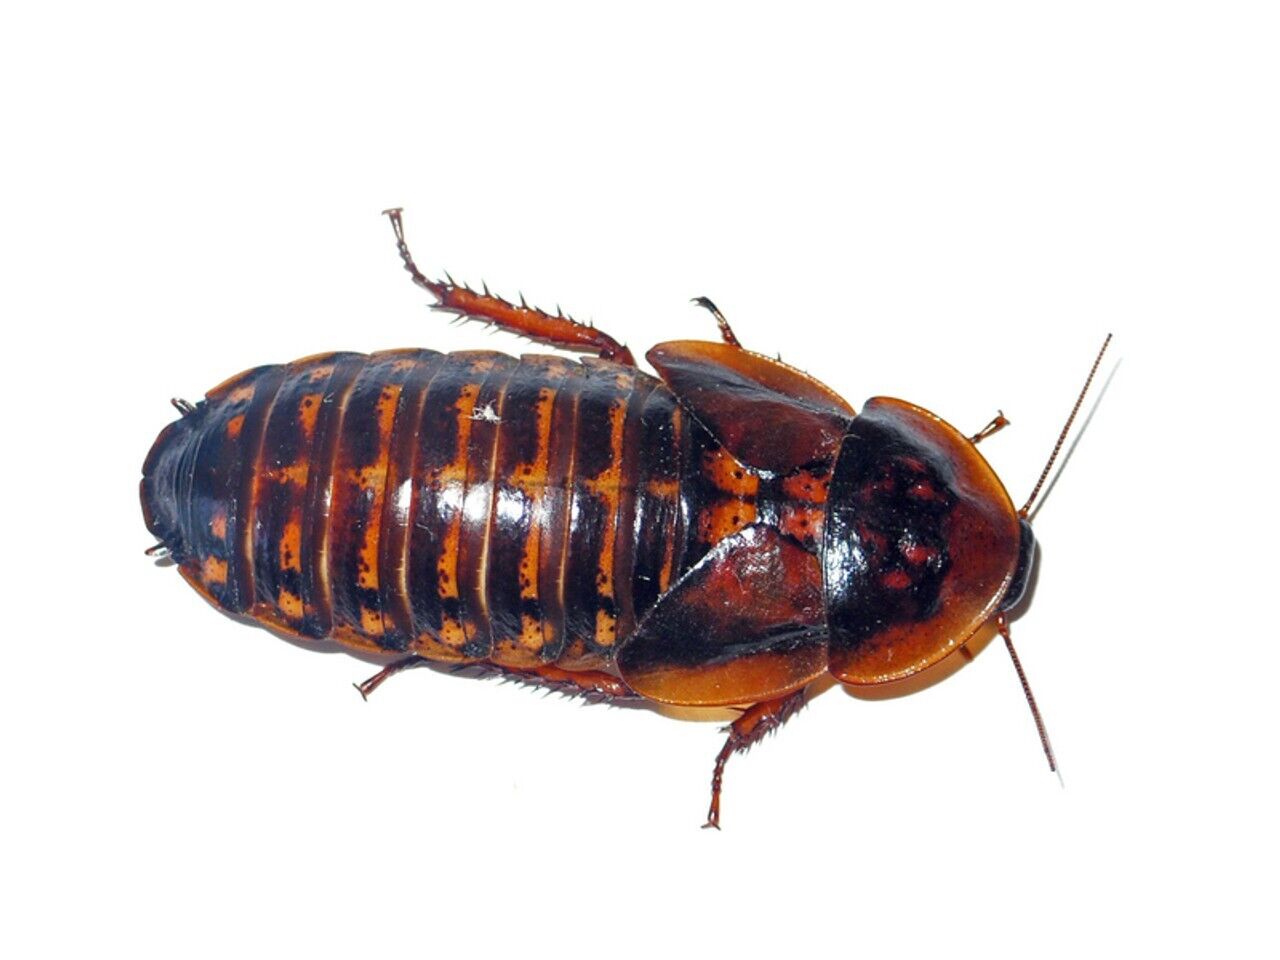 Dubia Roaches Adult Female